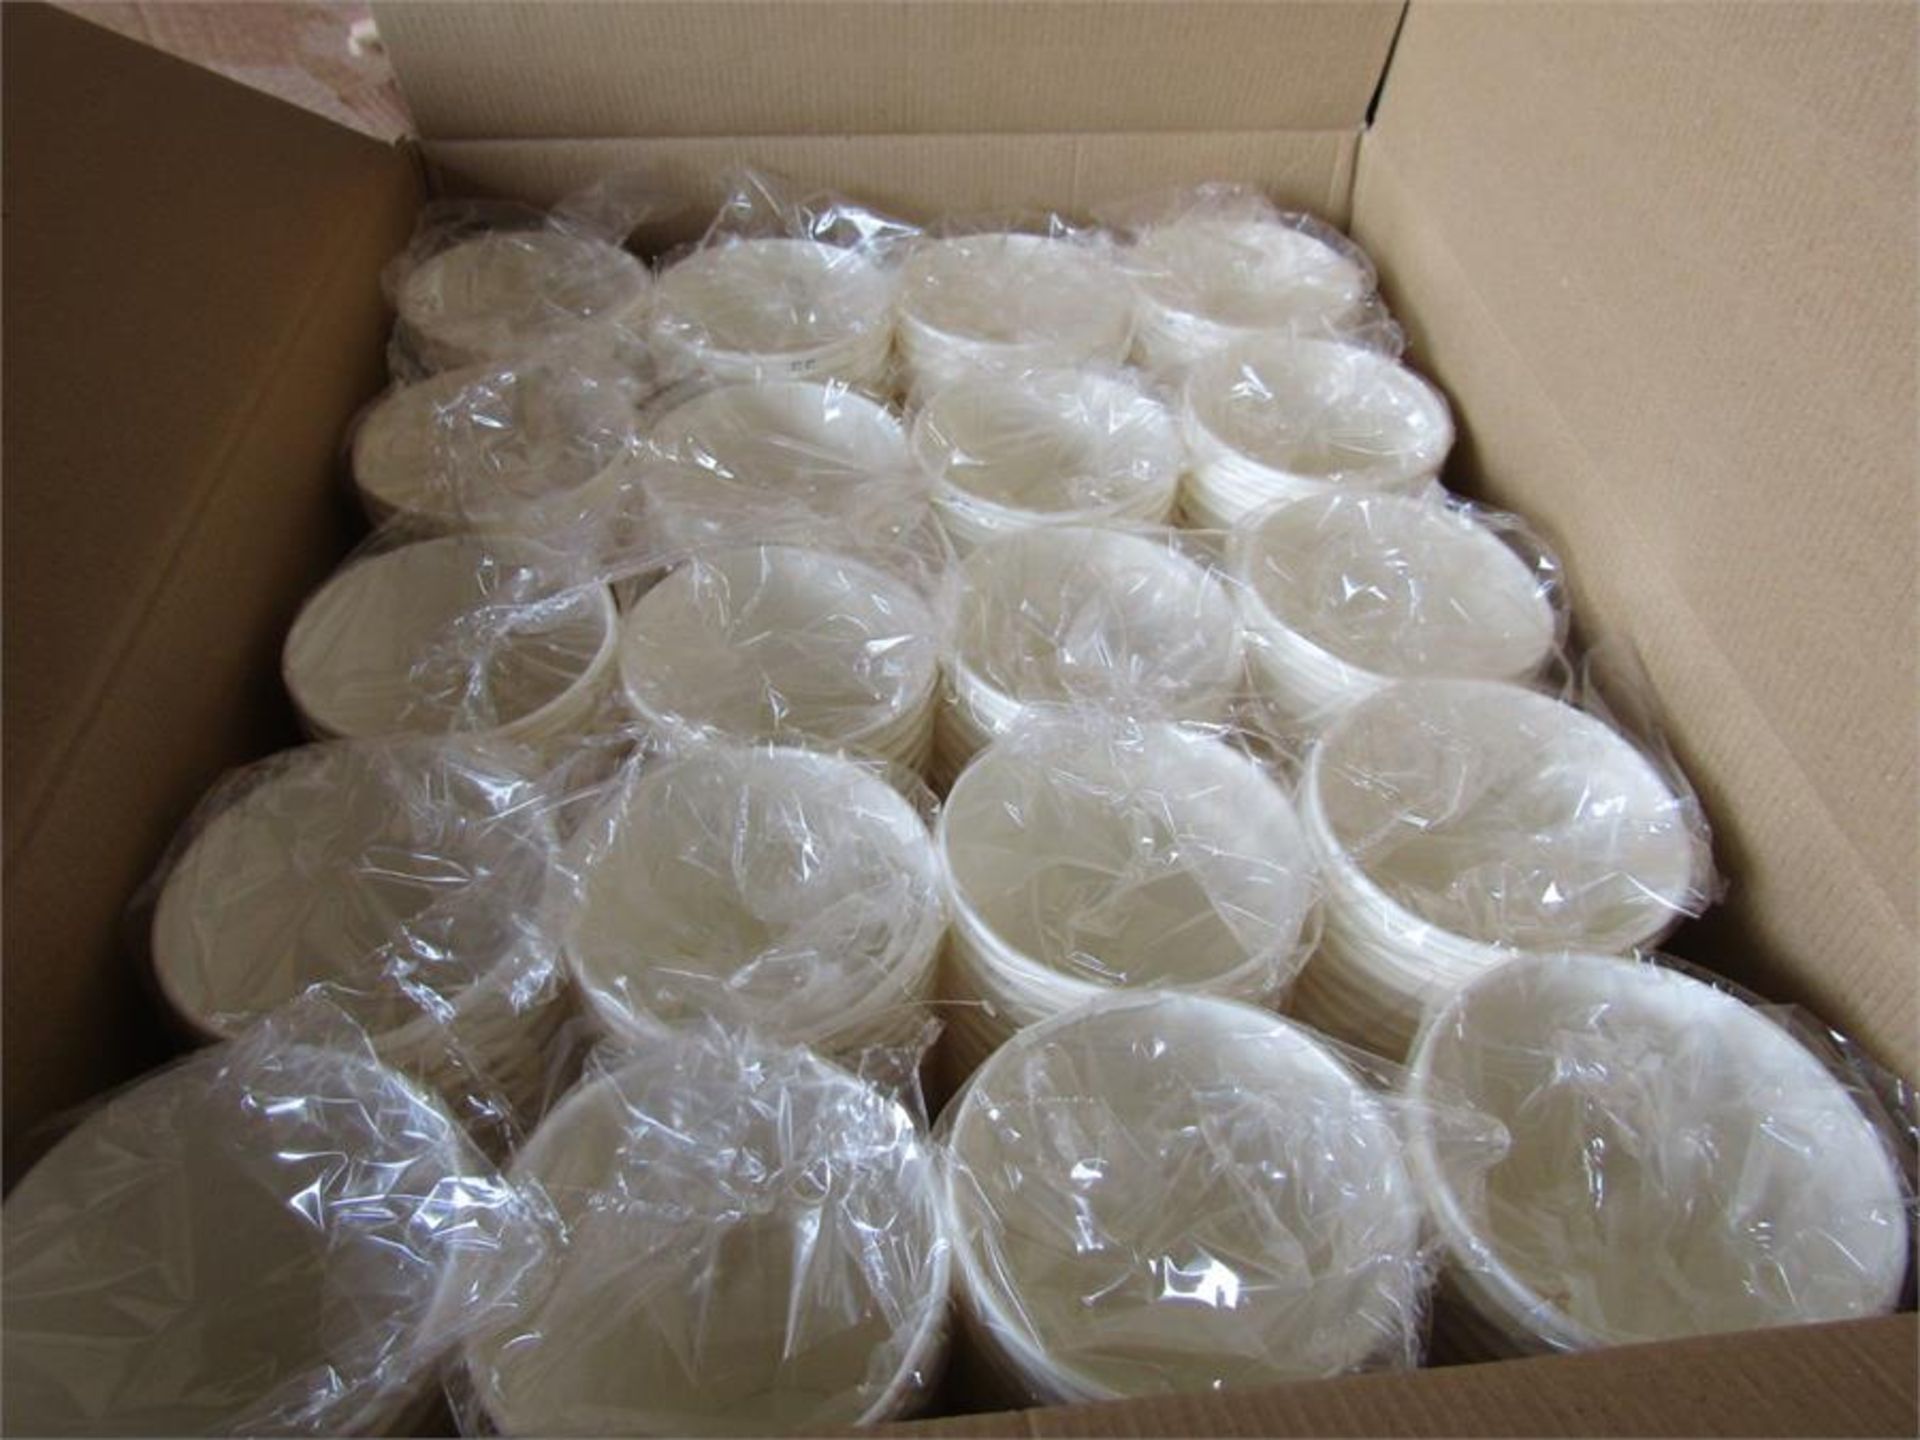 Box of 1000 x 600ml Cardboard Measuring Cups - Paint Measure - TCB-1000 164366 - Image 2 of 3